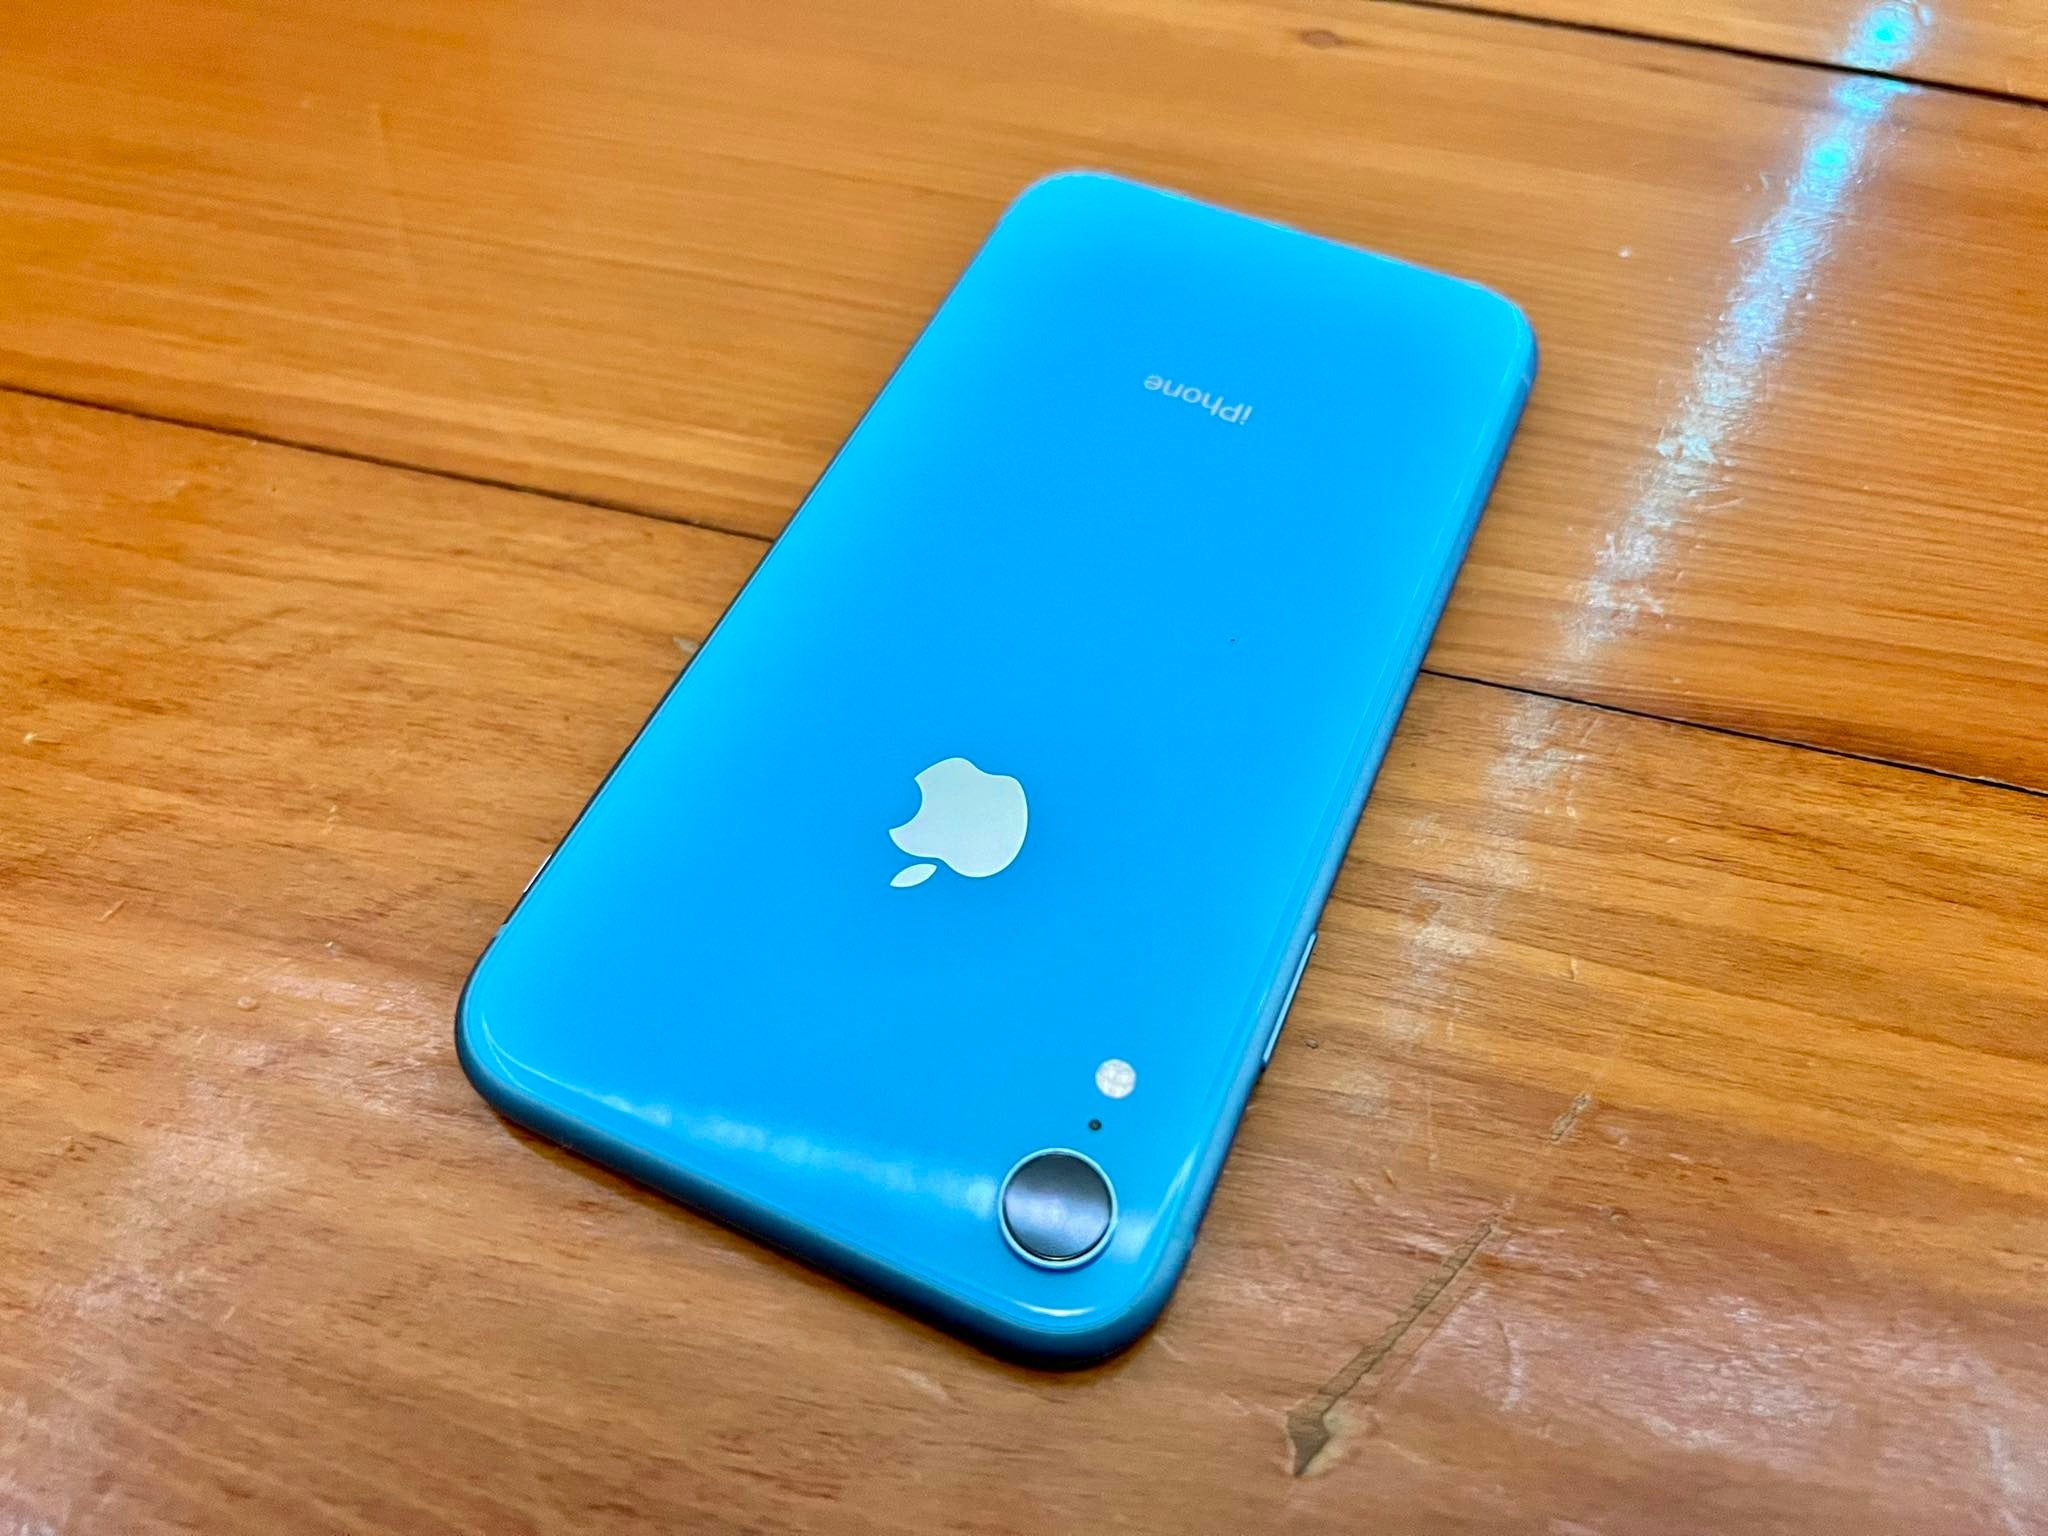 Apple iPhone XR 64GB Blue (As New) New Battery, Case, Screen Protector & Shipping